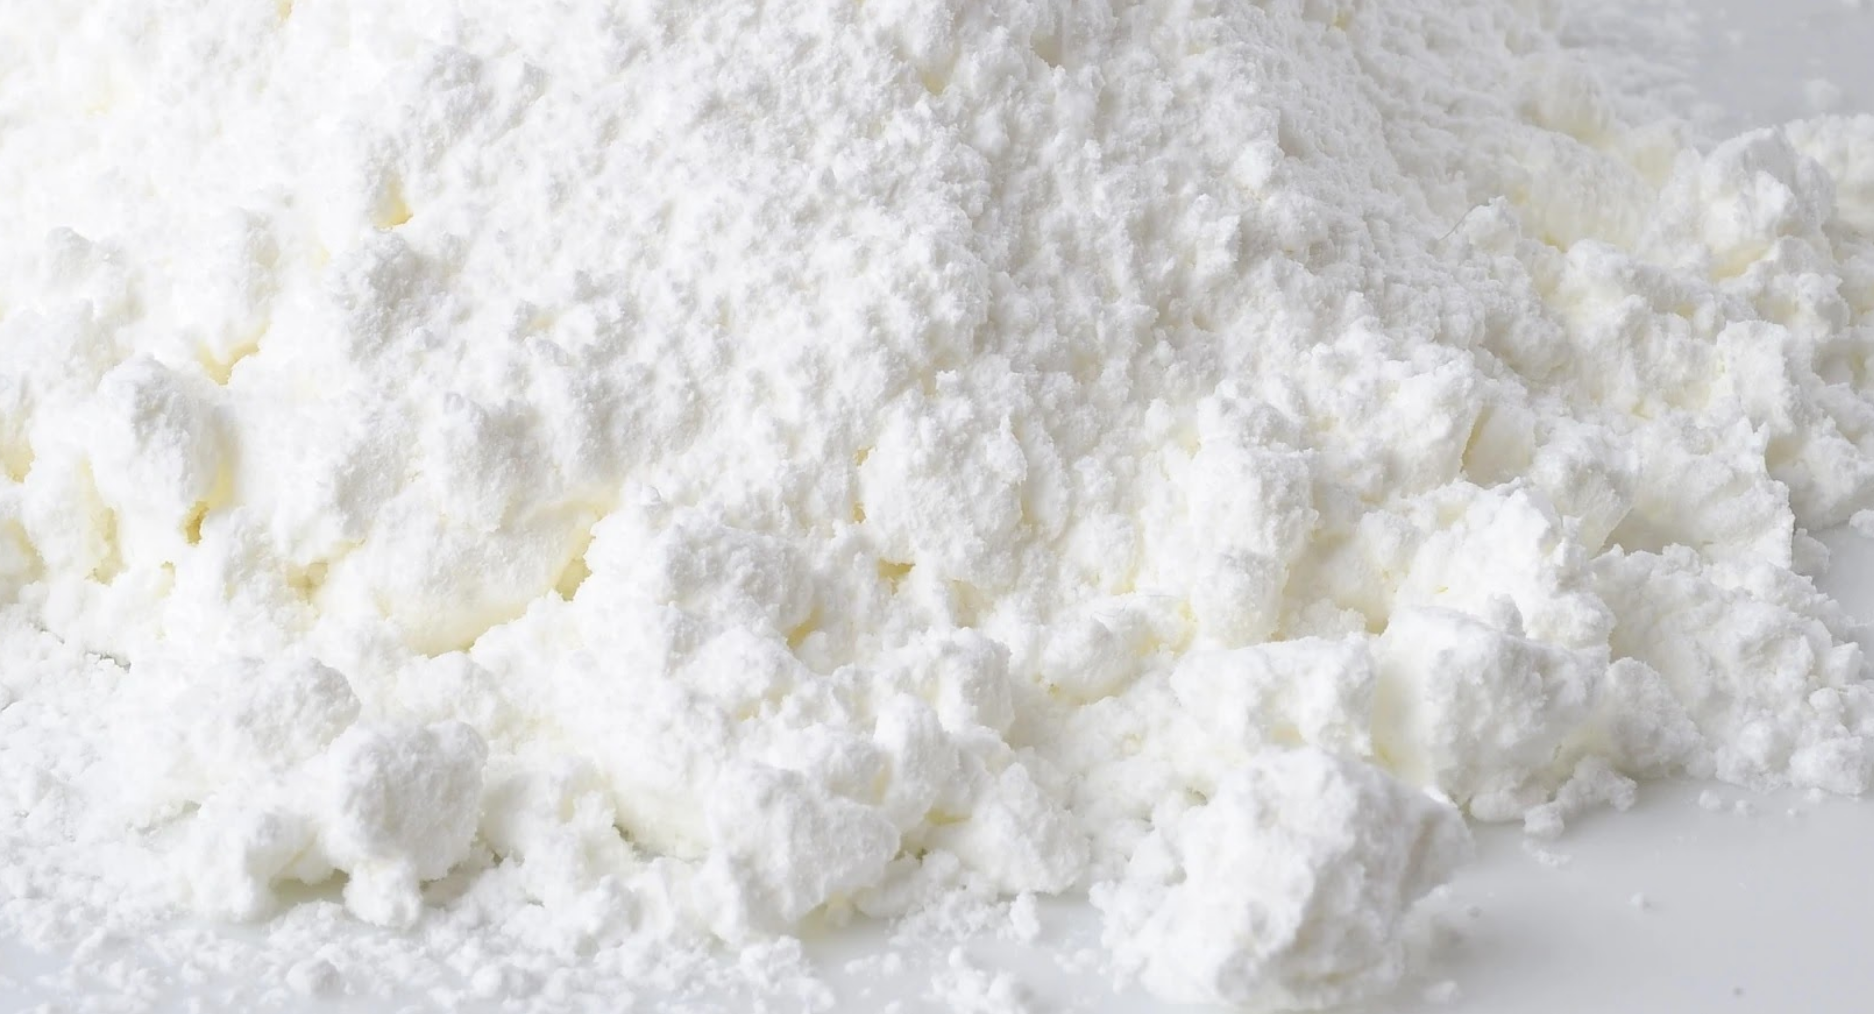 Understanding Creatine For Performance Part 1: What the hell is it?